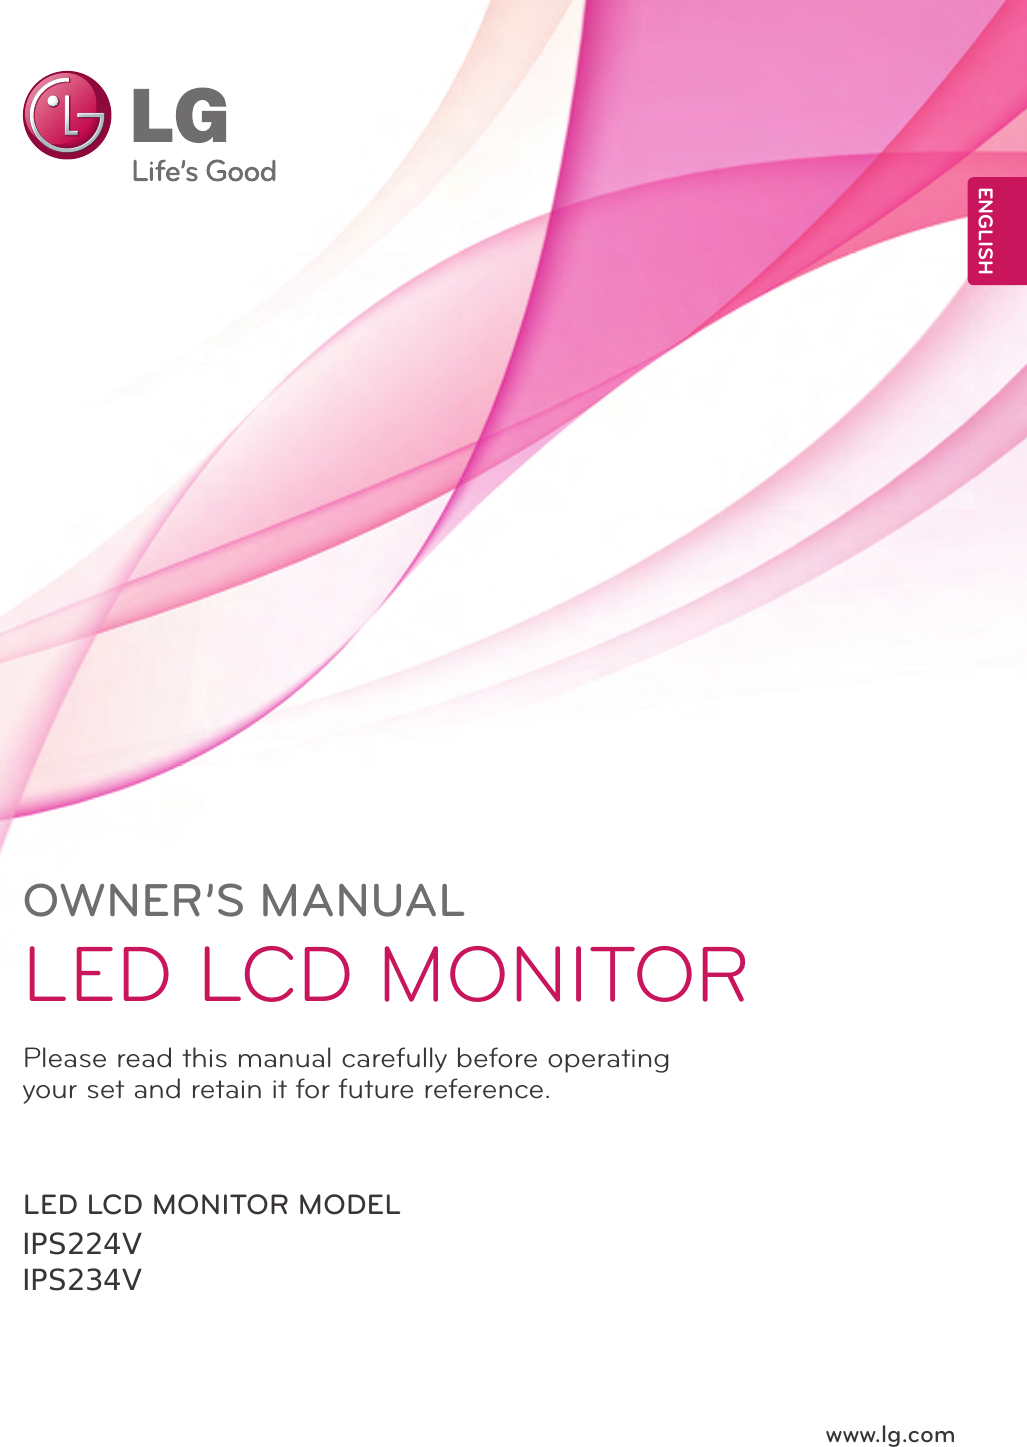 www.lg.comOWNER’S MANUALLED LCD MONITORIPS224VIPS234VPlease read this manual carefully before operating your set and retain it for future reference.LED LCD MONITOR MODELENGLISH